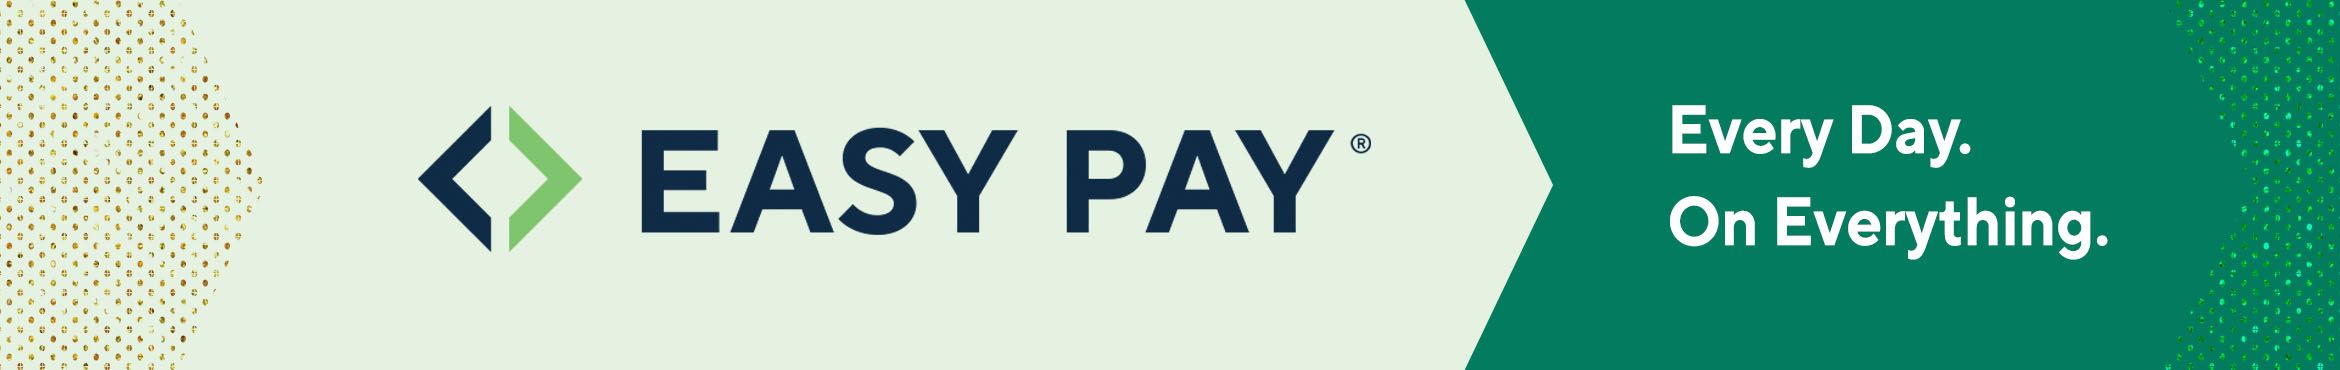 Easy Pay® Every Day. On Everything.